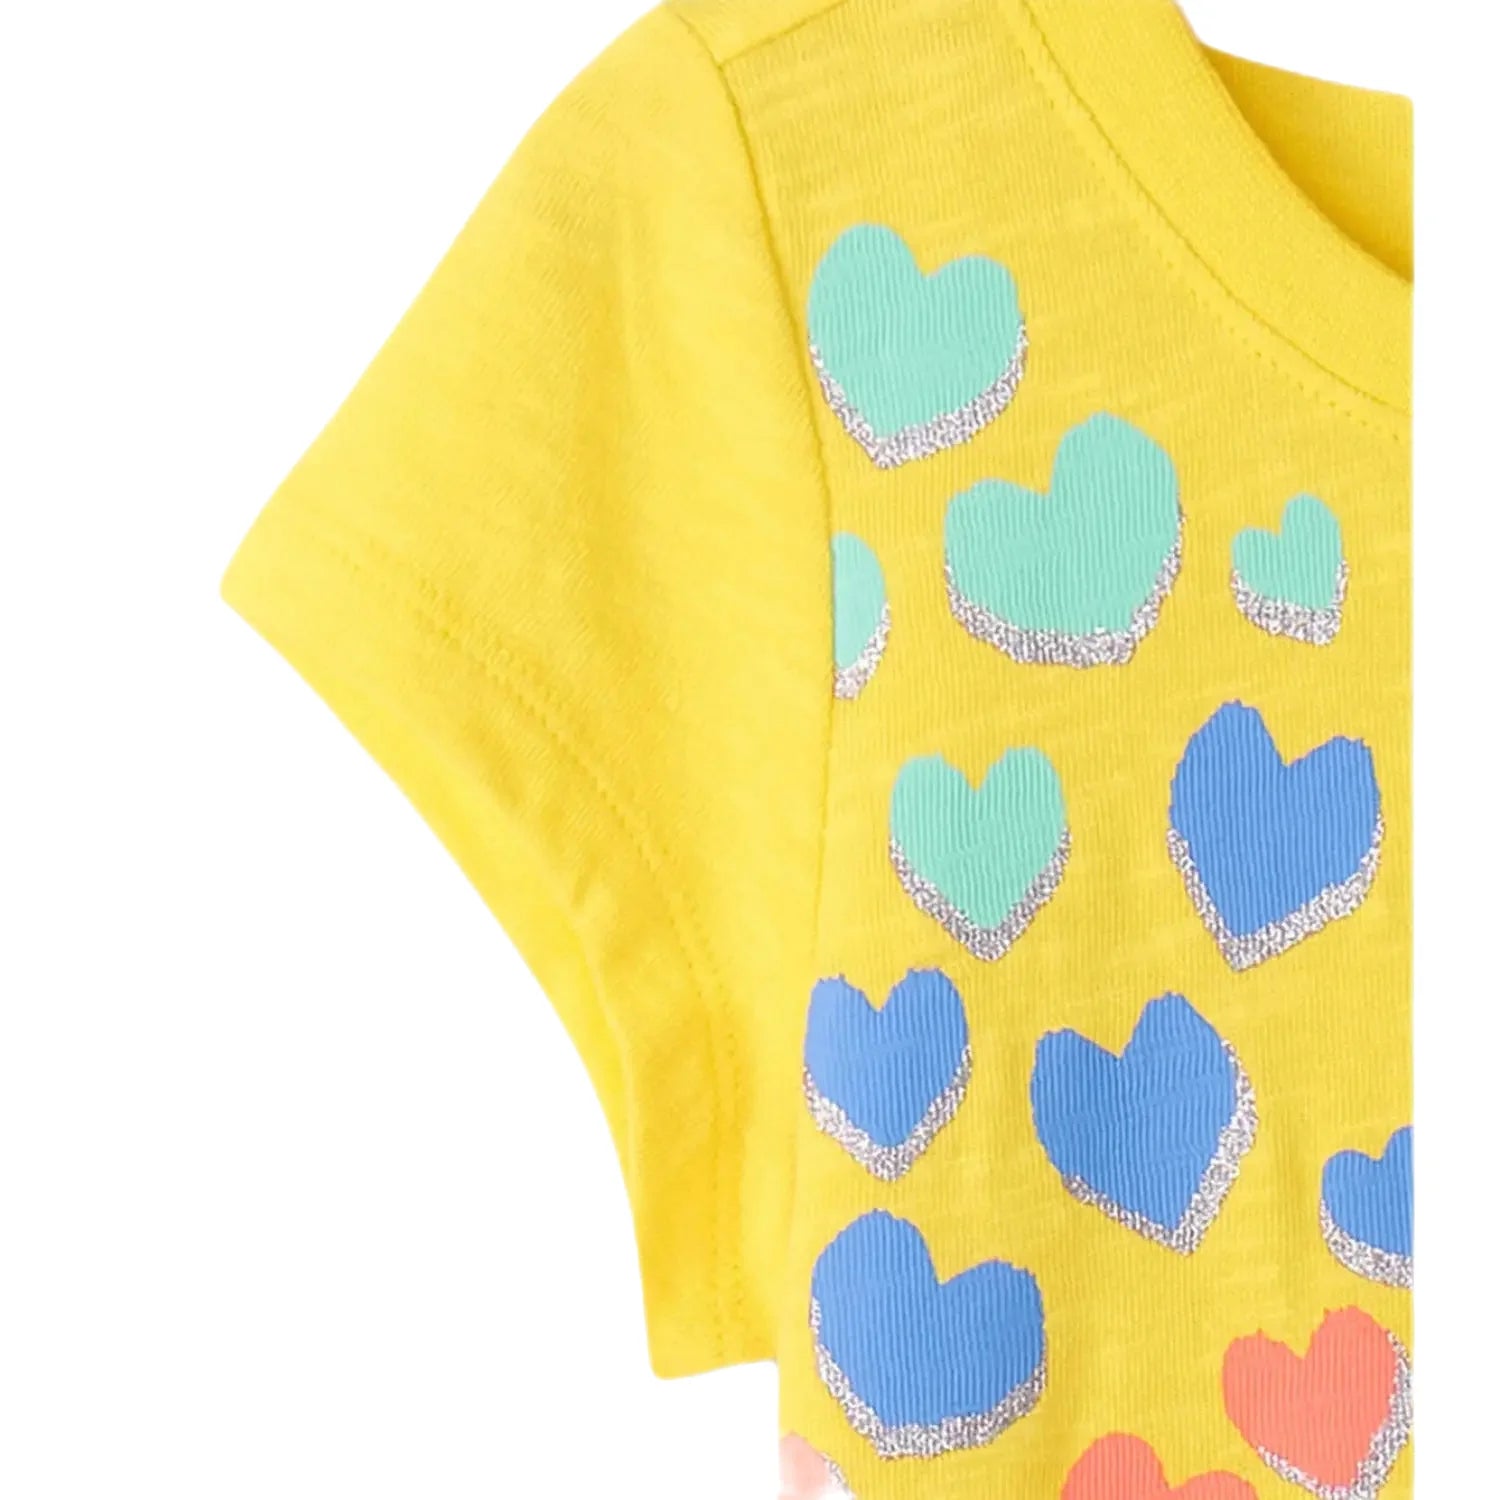 Hatley Girl's Falling Hearts Graphic Tee. Sleeve detail view.